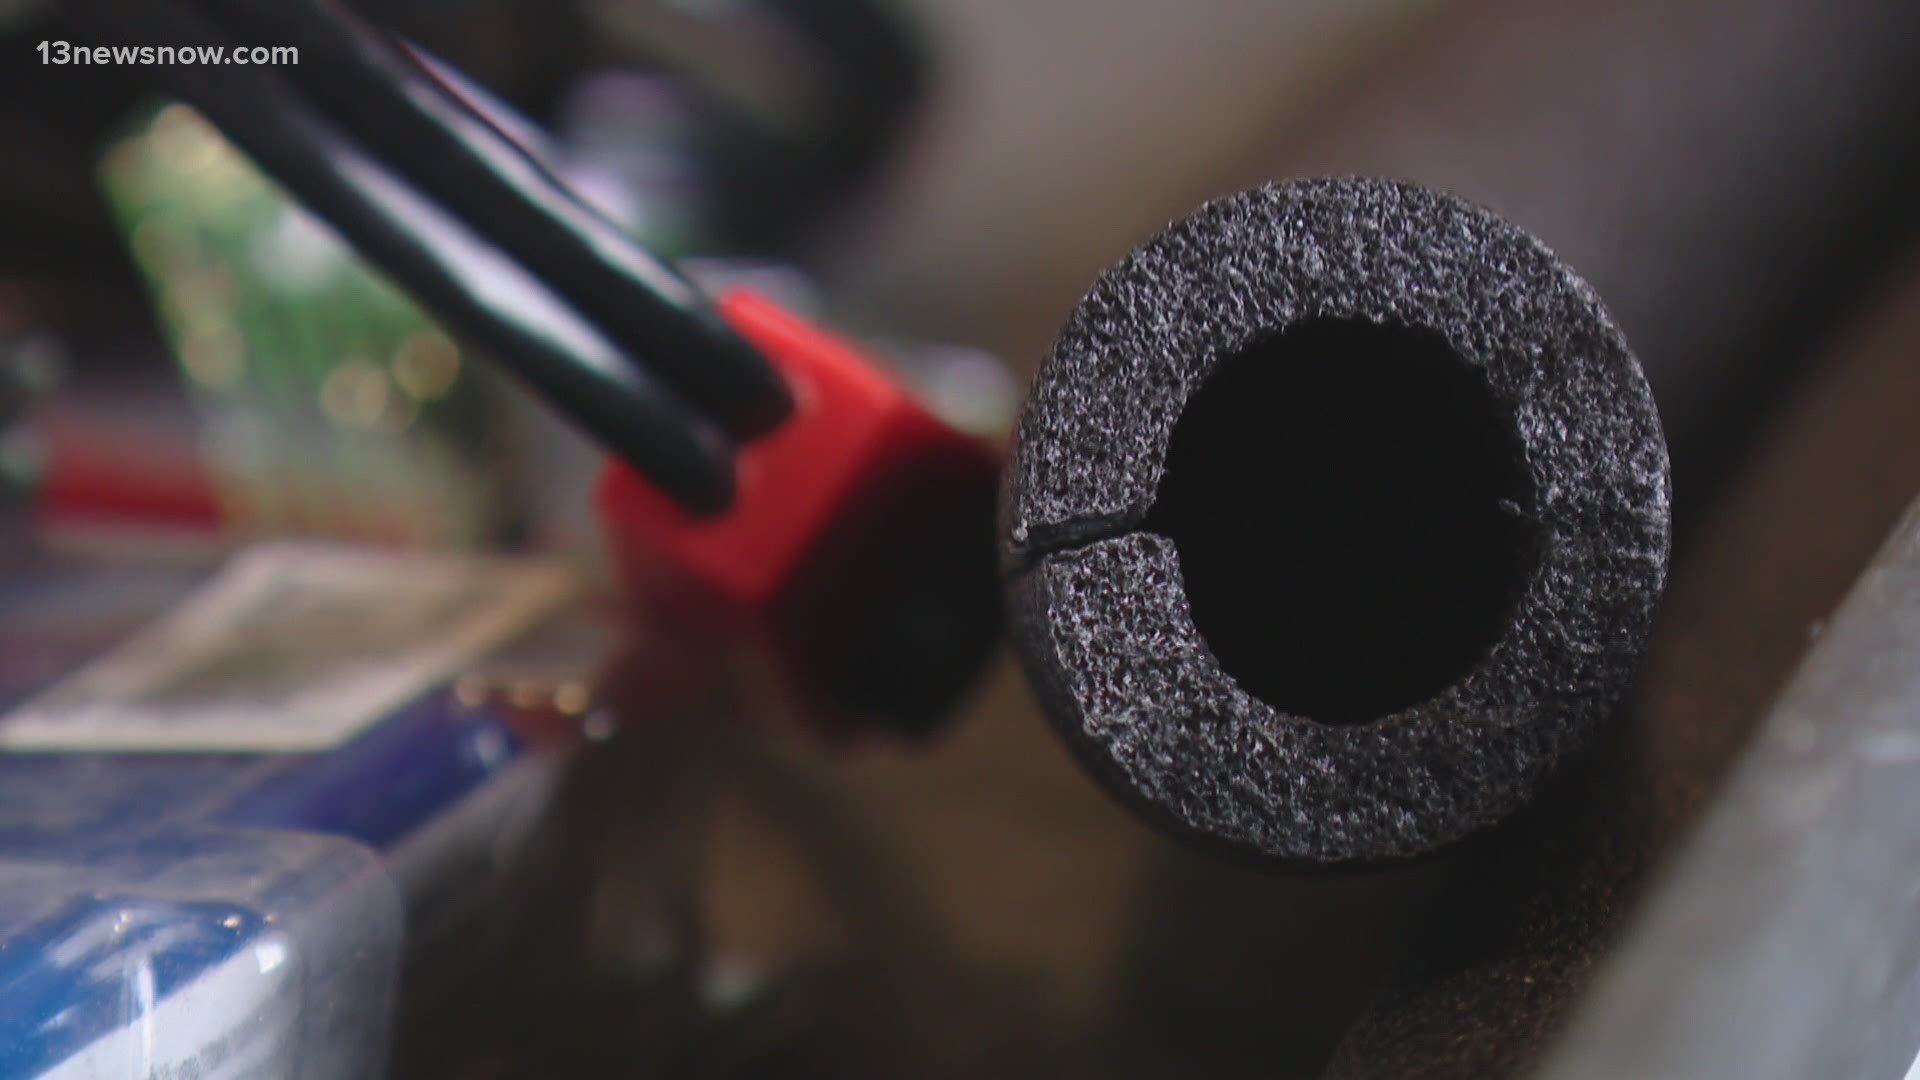 13News Now Angelo Vargas spoke to plumbing experts about how you can avoid costly repairs with ways to prevent the pipes in your home from freezing.